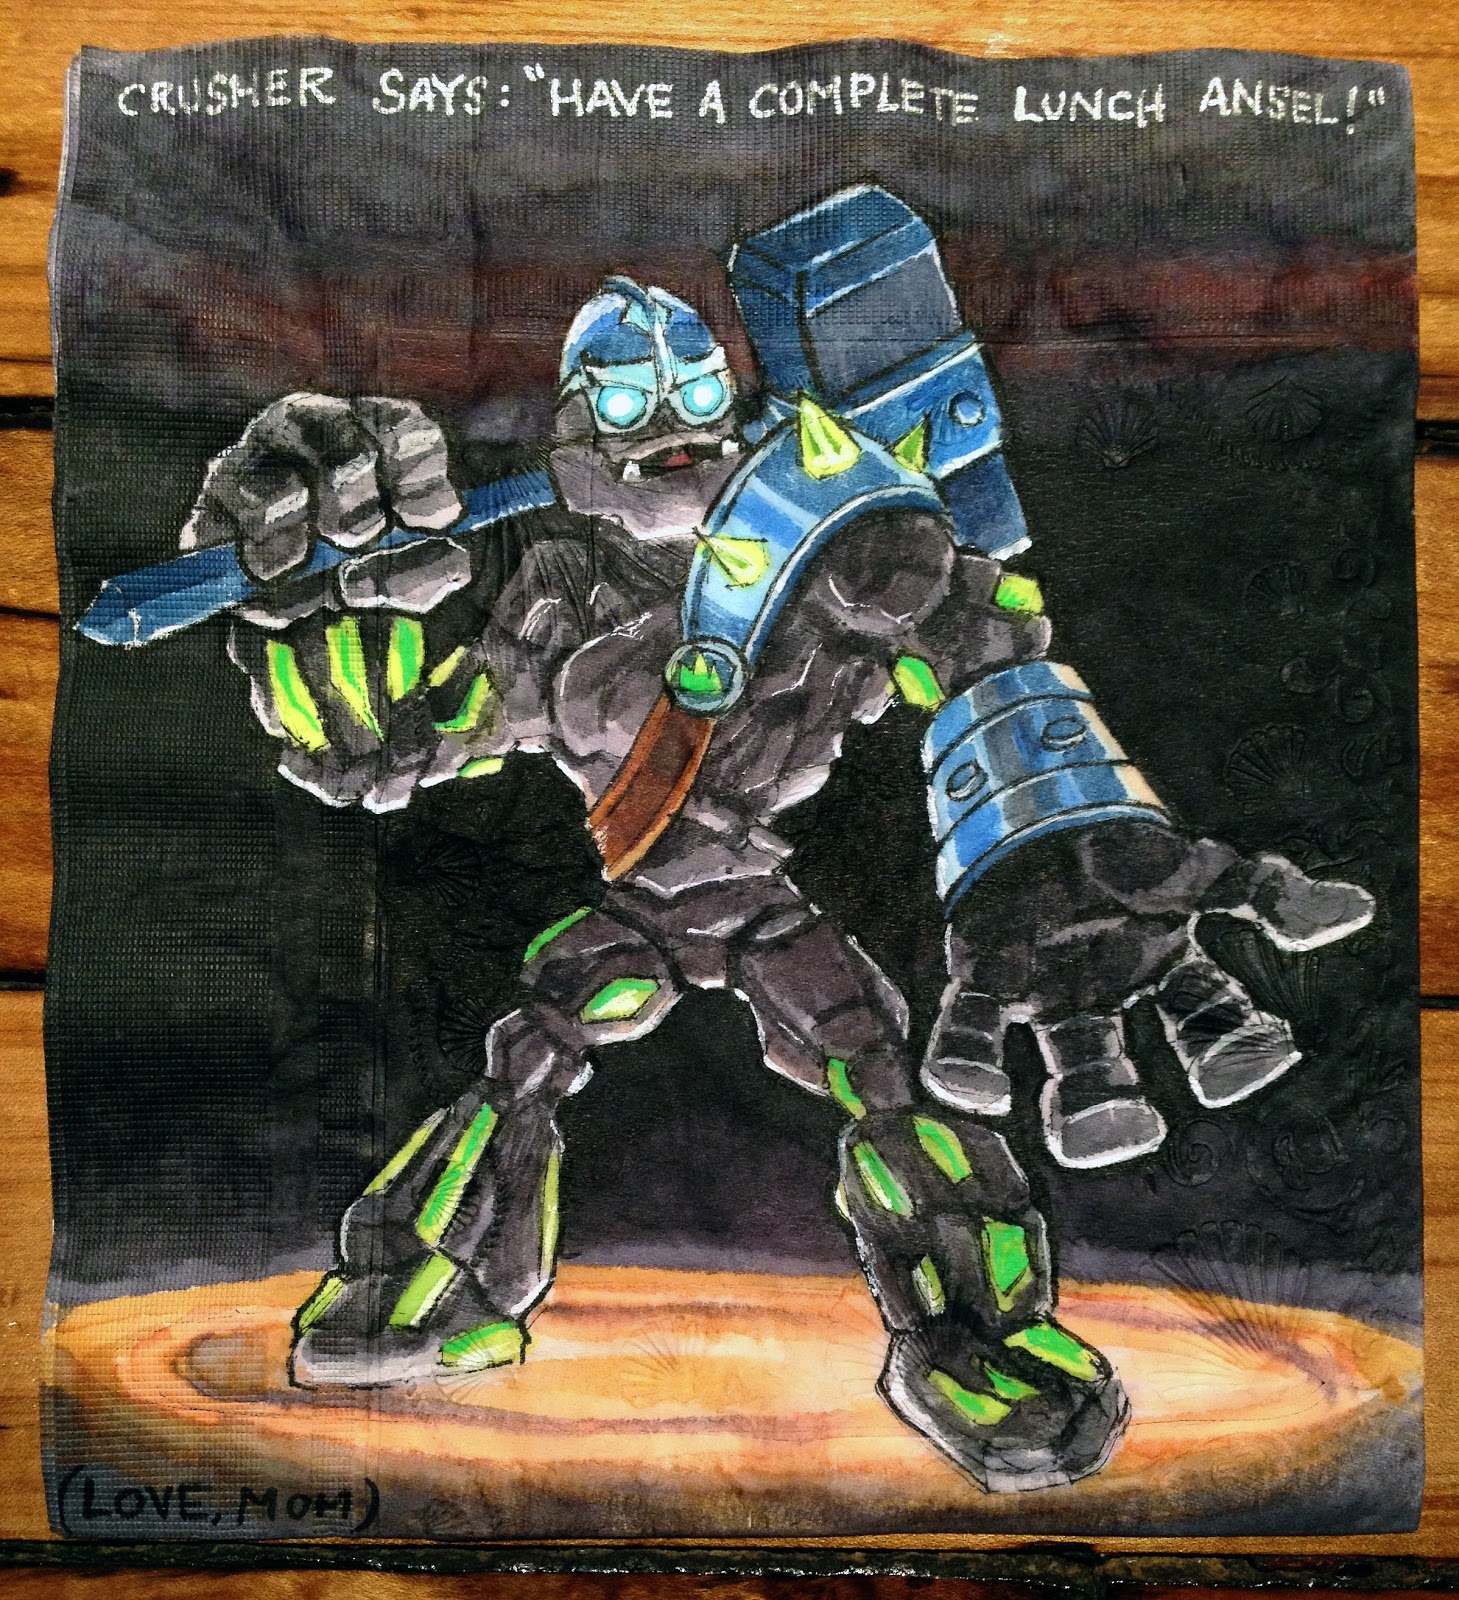 mecha - Crusher Says Have A Complete Lunch Ansel!" Love, Mor